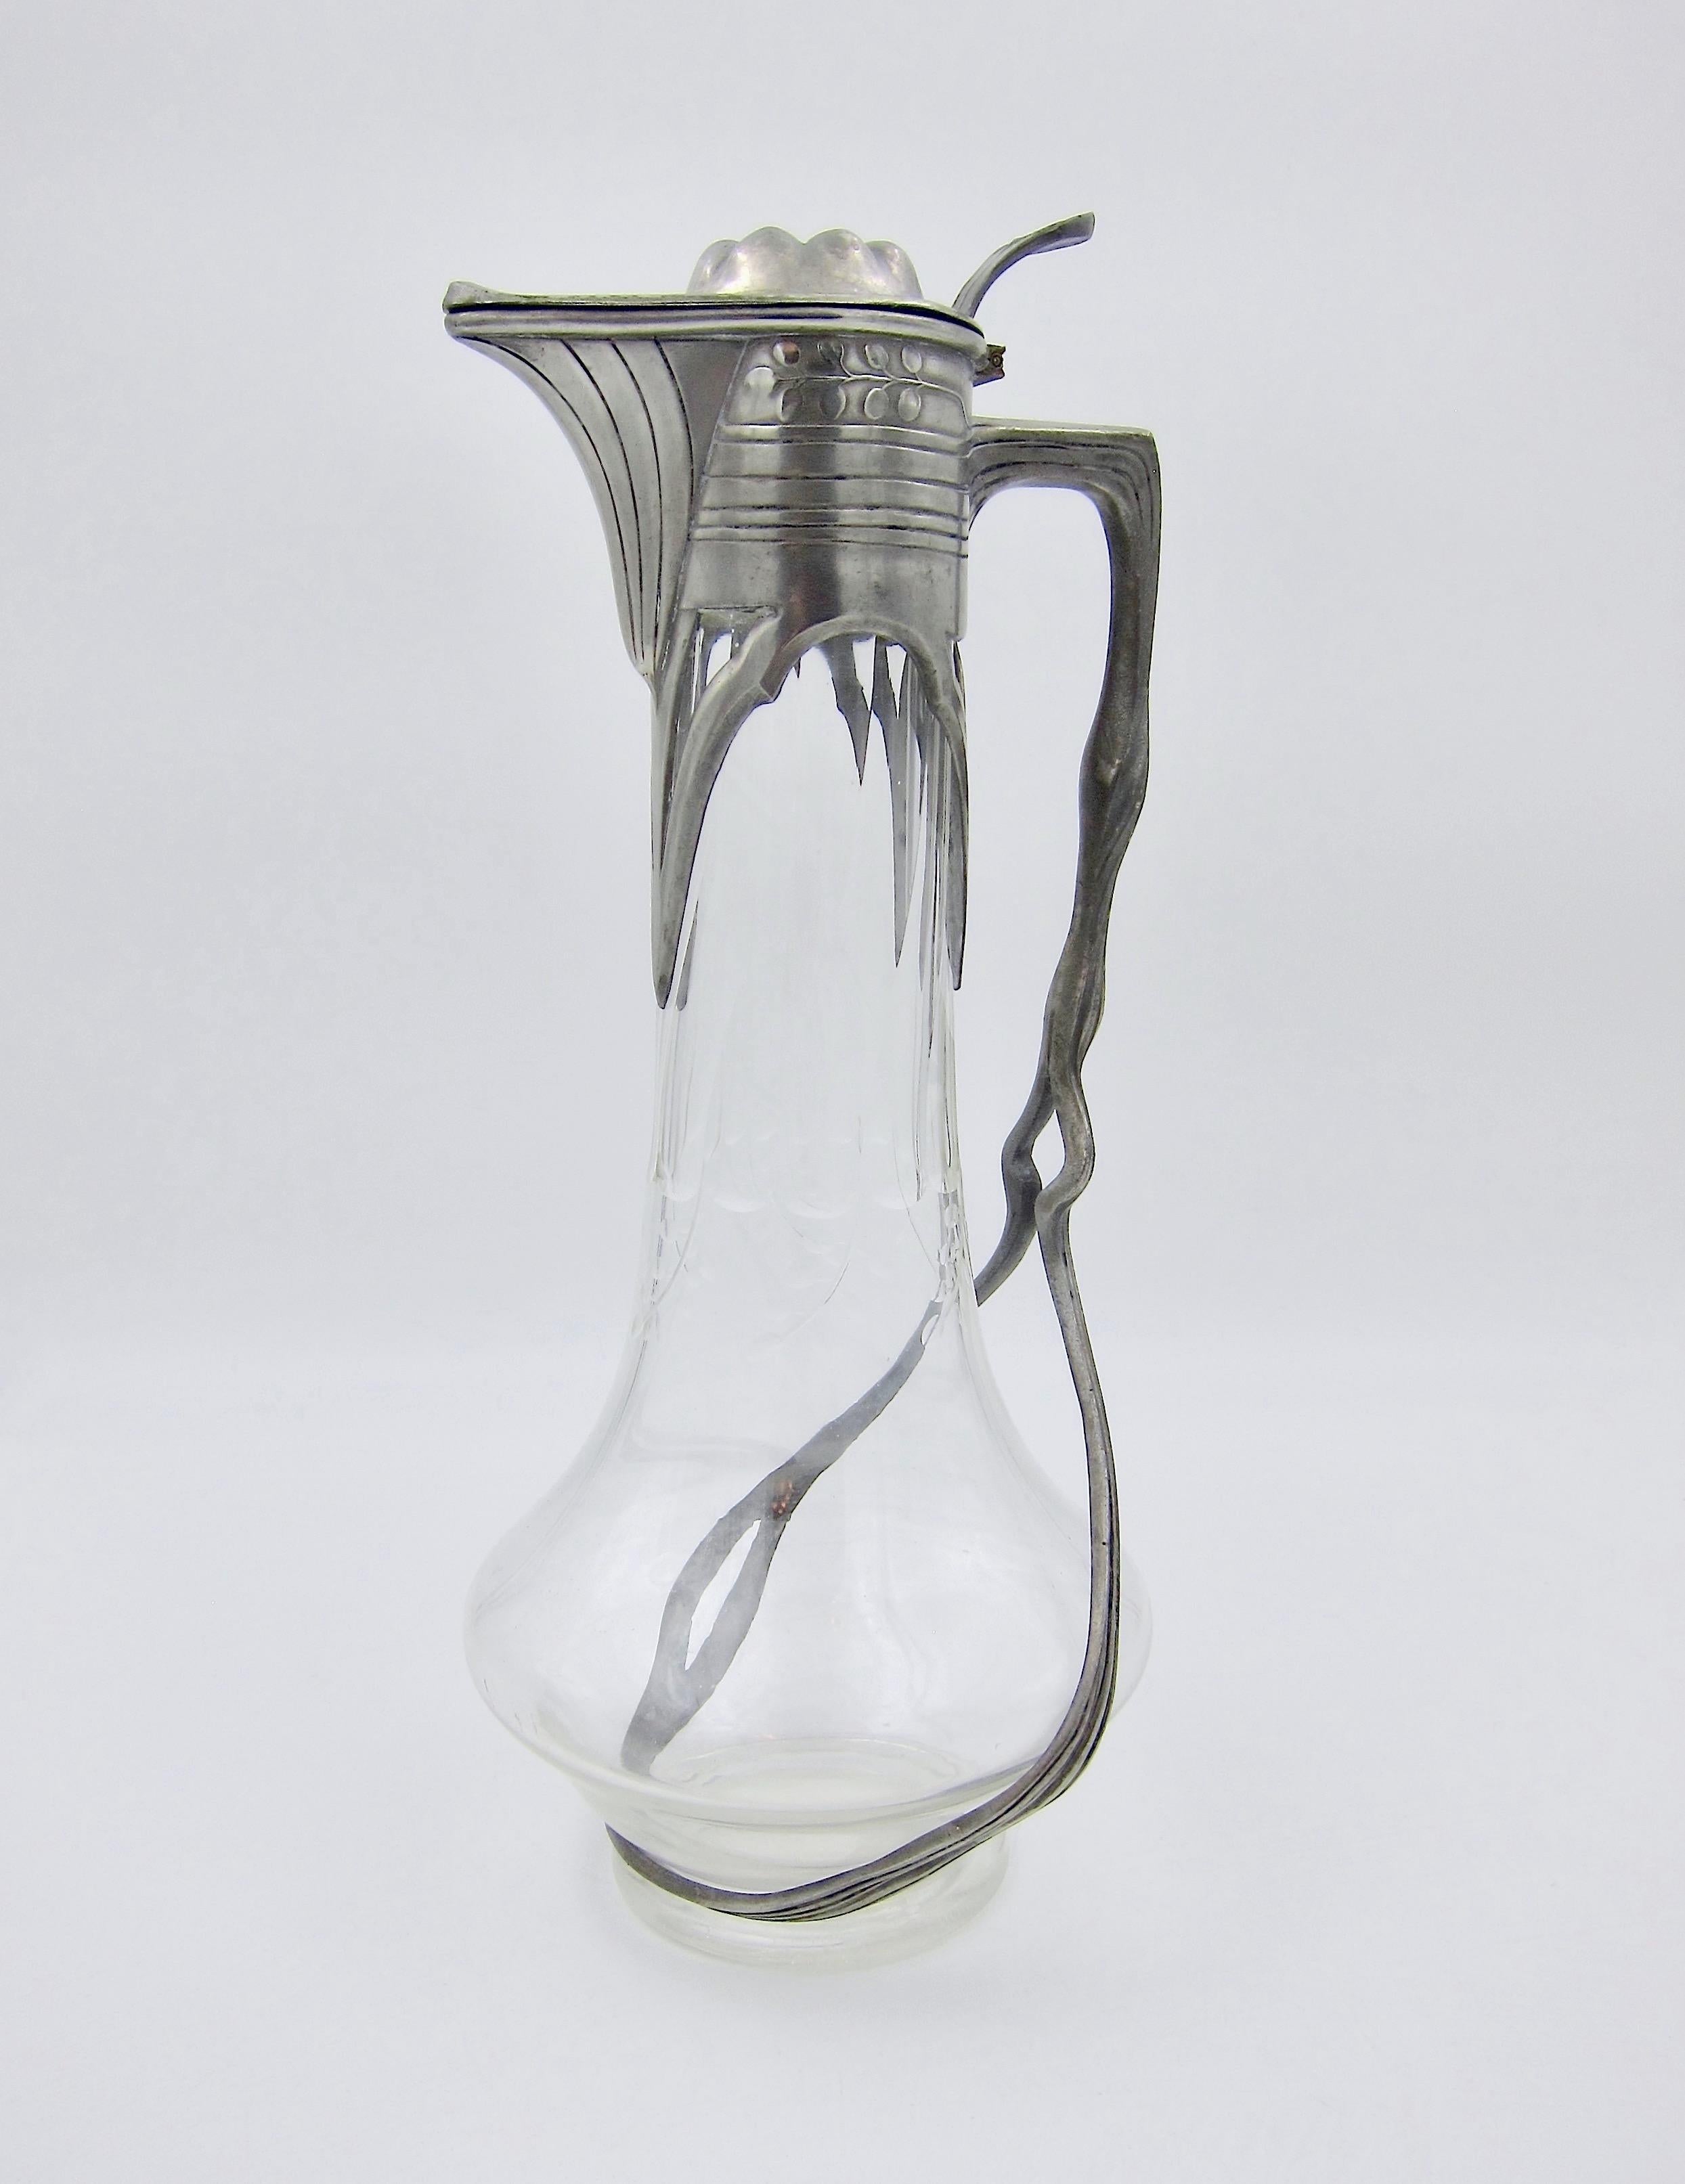 A German Jugendstil / Art Nouveau claret jug in clear glass with cut decoration in a silvery-gray pewter mount from Orivit AG of Cologne, circa 1900. The antique wine jug has a hinged and domed lid with strong linear patterns around the spout and